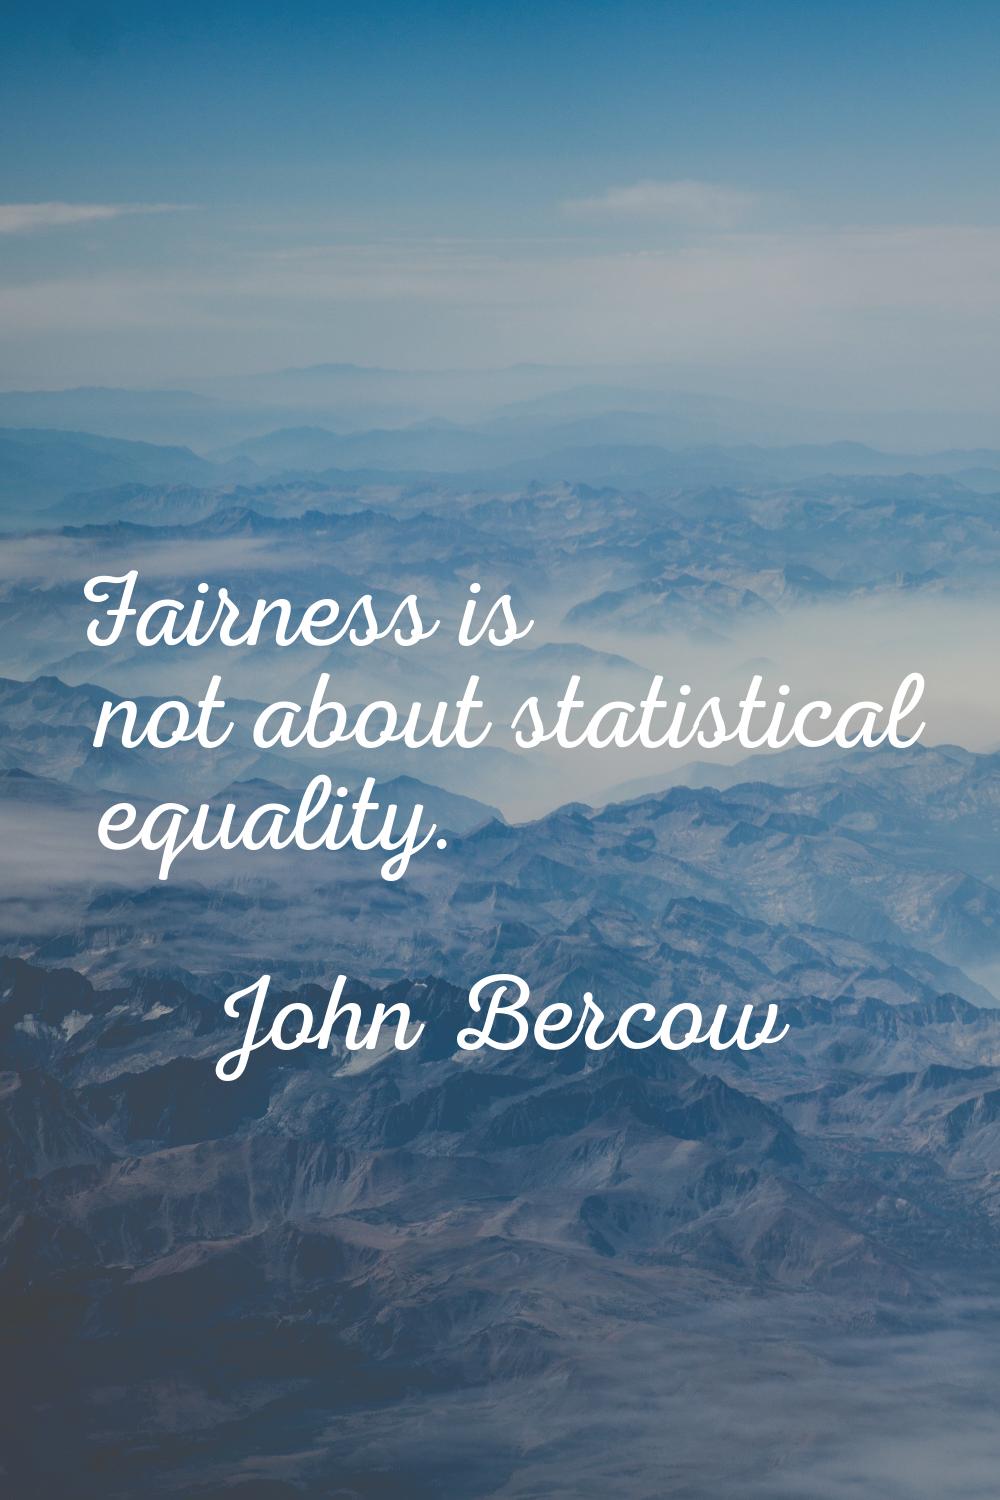 Fairness is not about statistical equality.